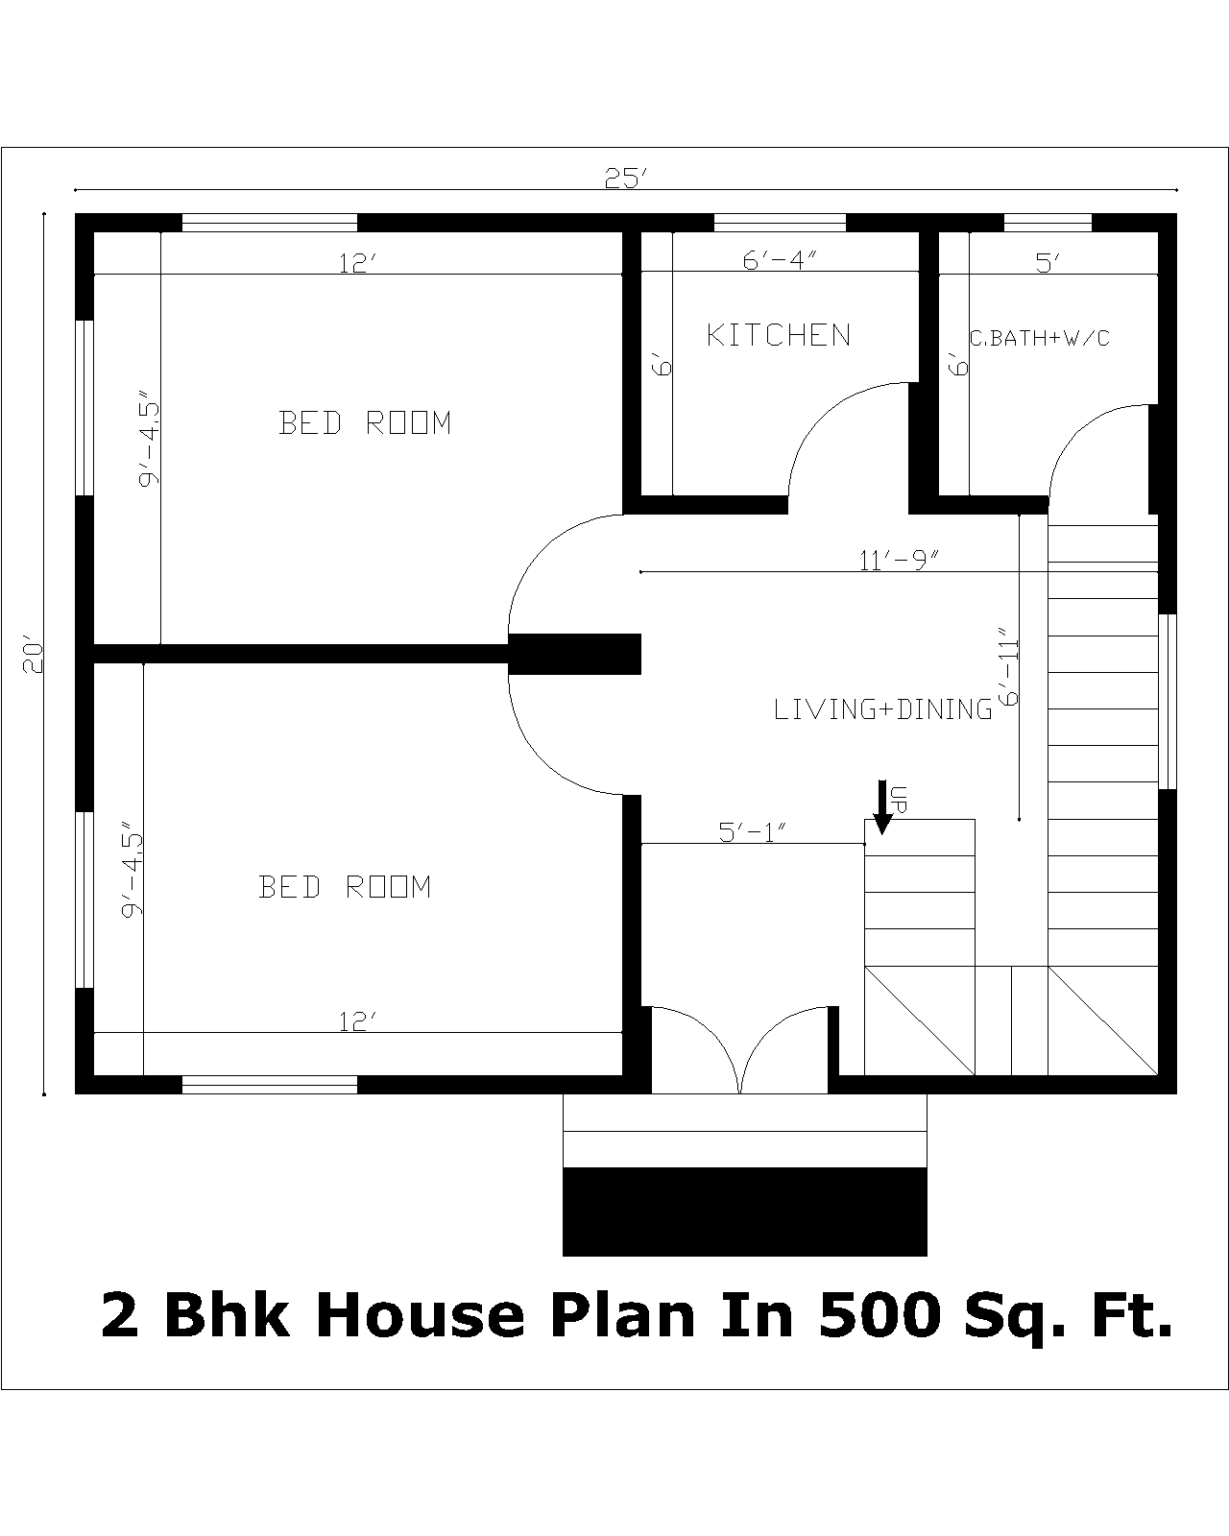 2 Bhk House Plan In 500 Sq.Ft  1229x1536 